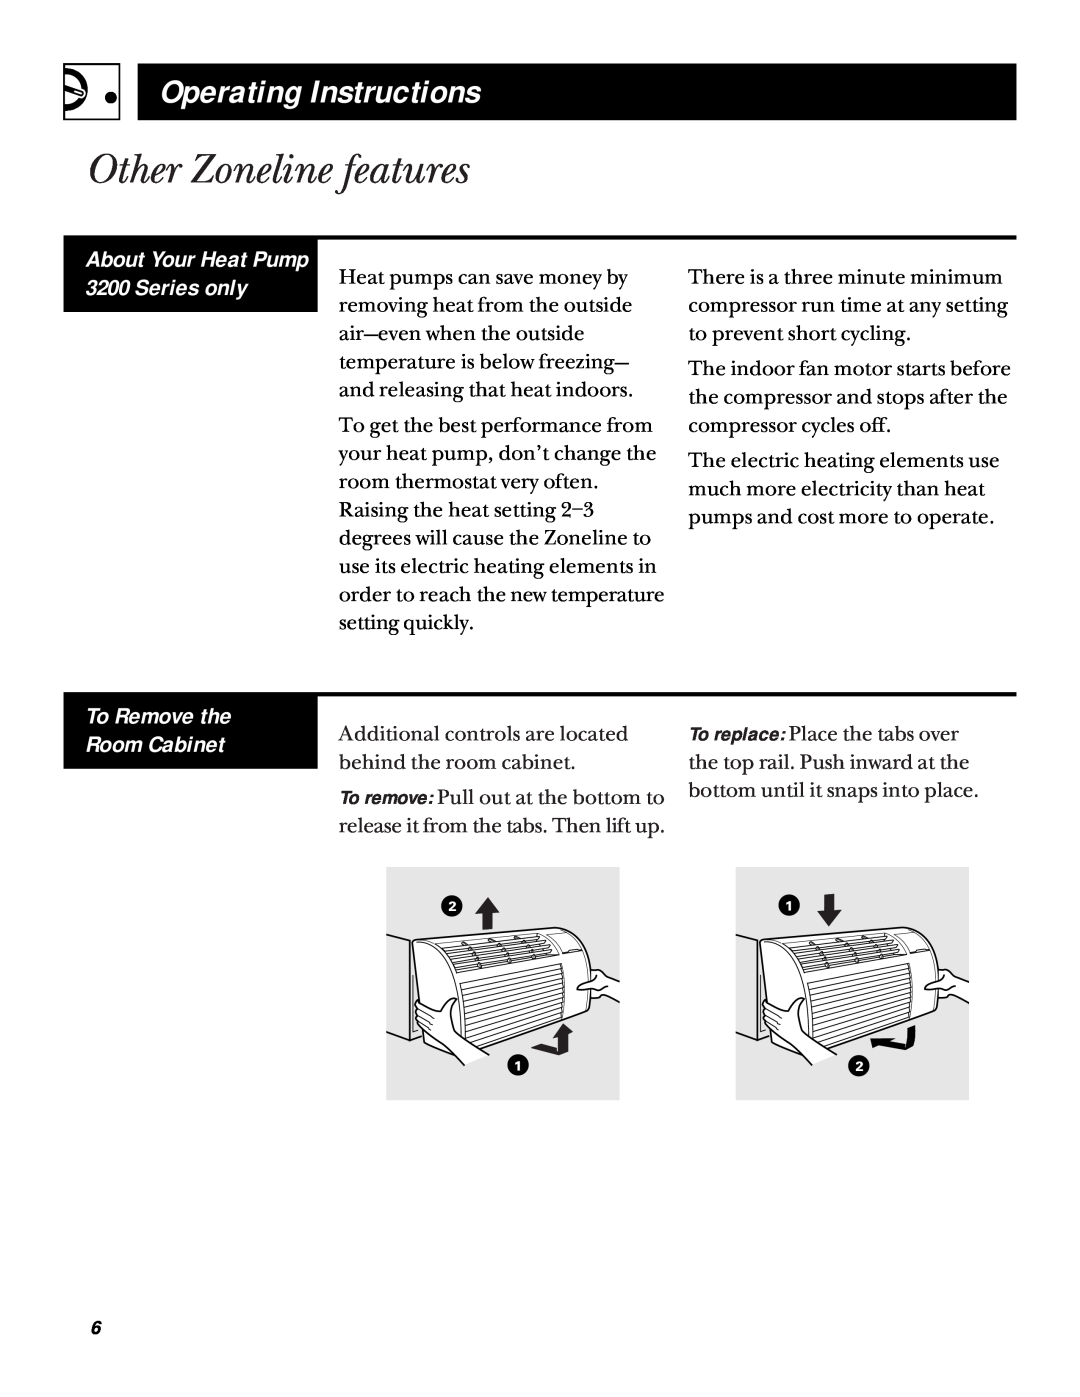 GE 3200 installation instructions Other Zoneline features, Operating Instructions, To Remove the Room Cabinet 